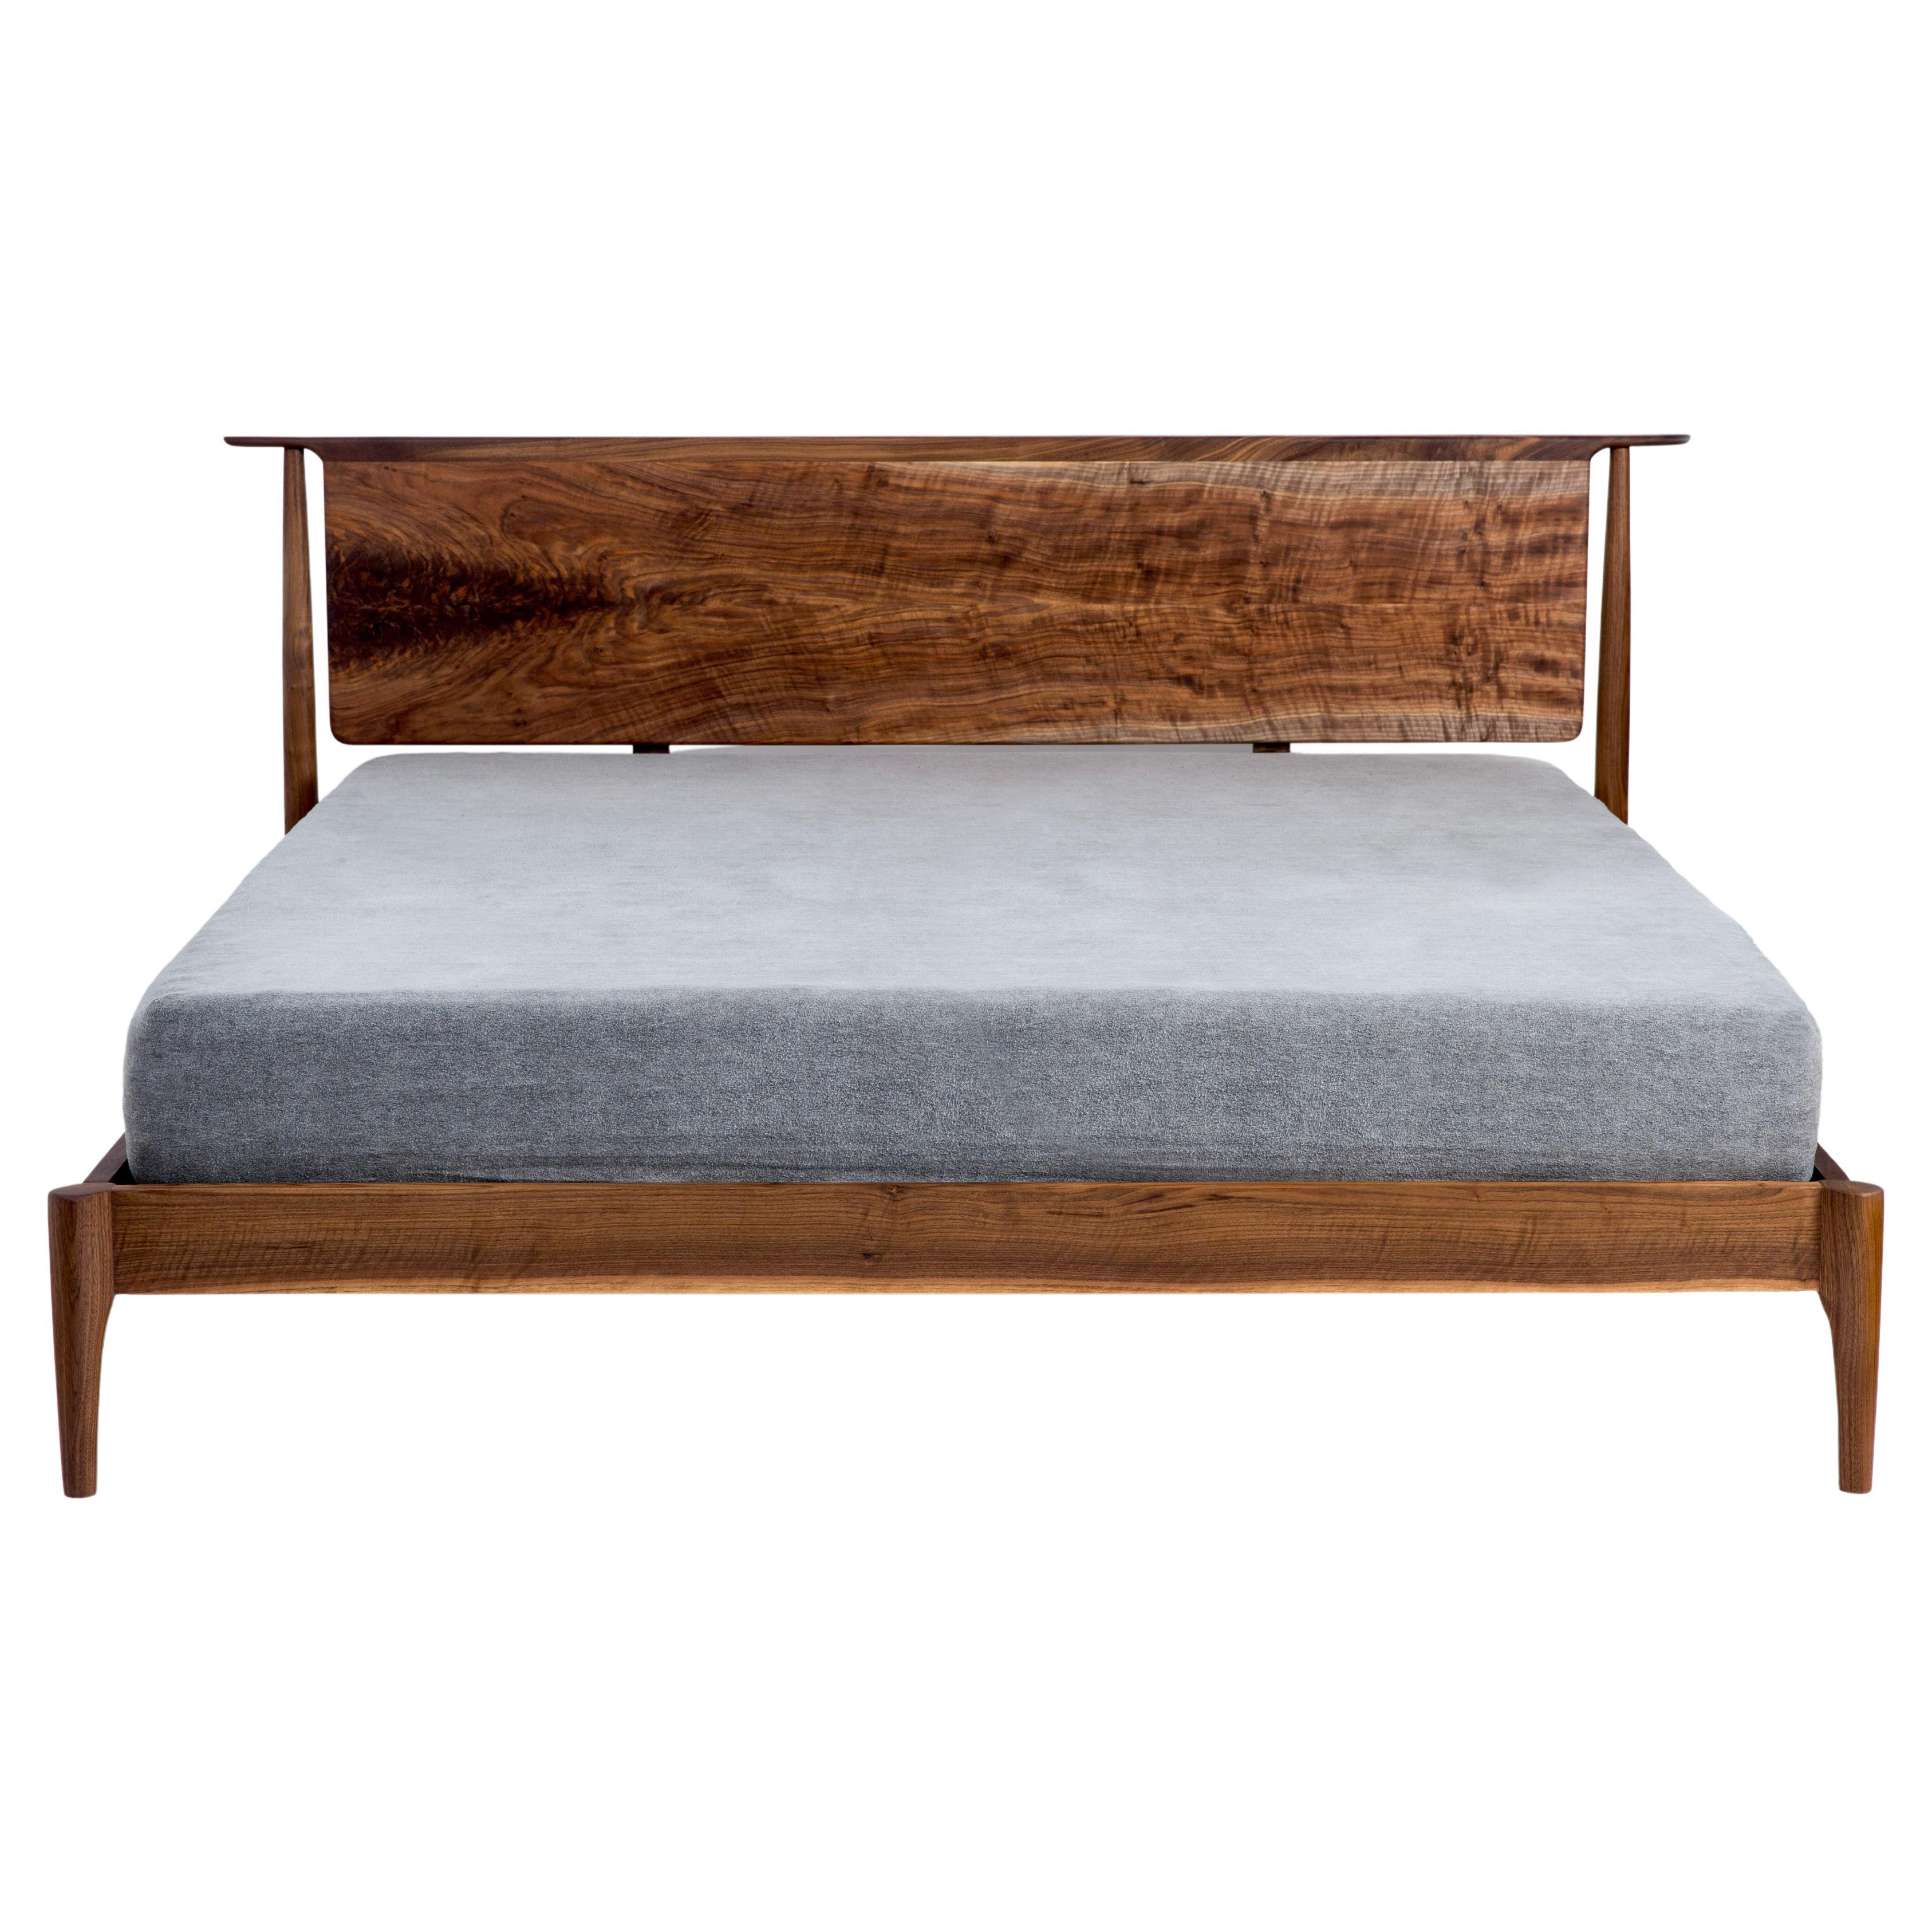 Oiled Mid century Modern Solid Wood Platform Bed For Sale